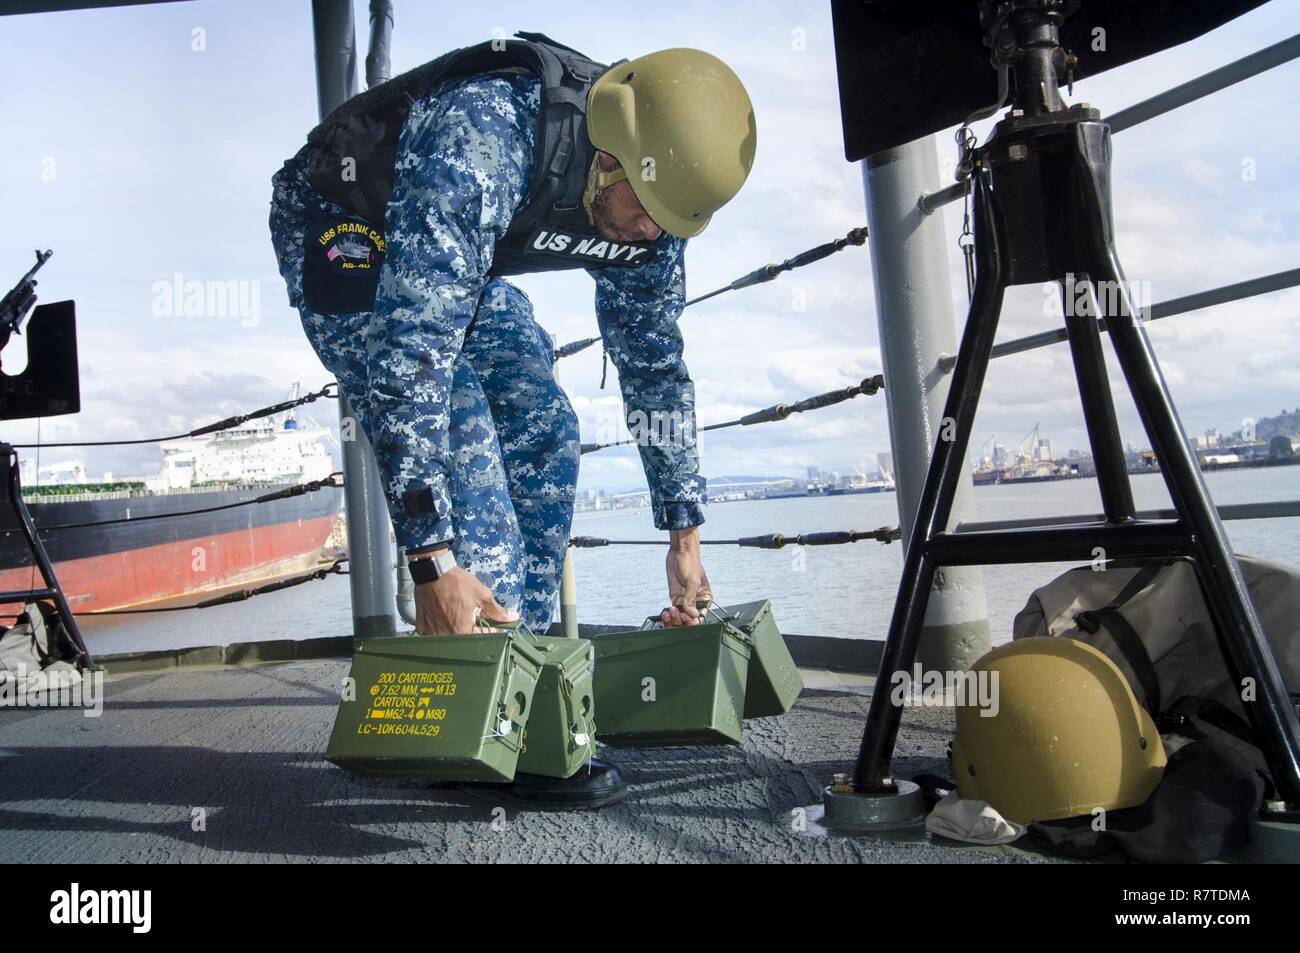 PORTLAND, Ore. (April 6, 2017) - Boatswain's Mate 3rd Class Brandon Elliott, a native of Sanford, N.C. and assigned to the submarine tender USS Frank Cable (AS 40), secures the weapons watch from sea and anchor, after transiting the Columbia River to Portland, Ore., April 6. Frank Cable is in Portland, Ore. for a scheduled dry-dock phase maintenance availability. Stock Photo